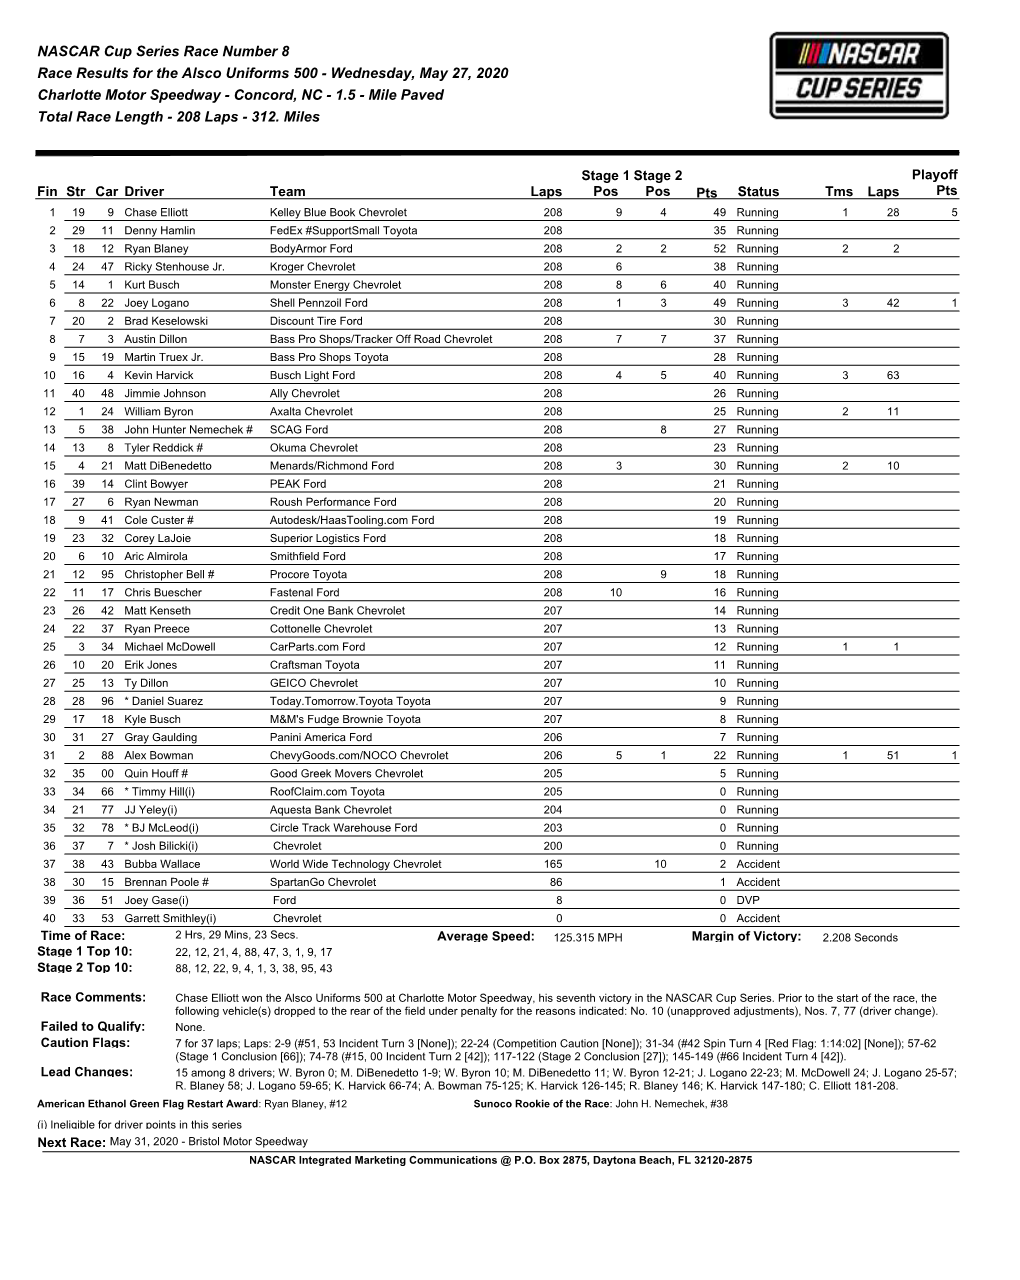 NASCAR Cup Series Race Number 8 Race Results for the Alsco Uniforms